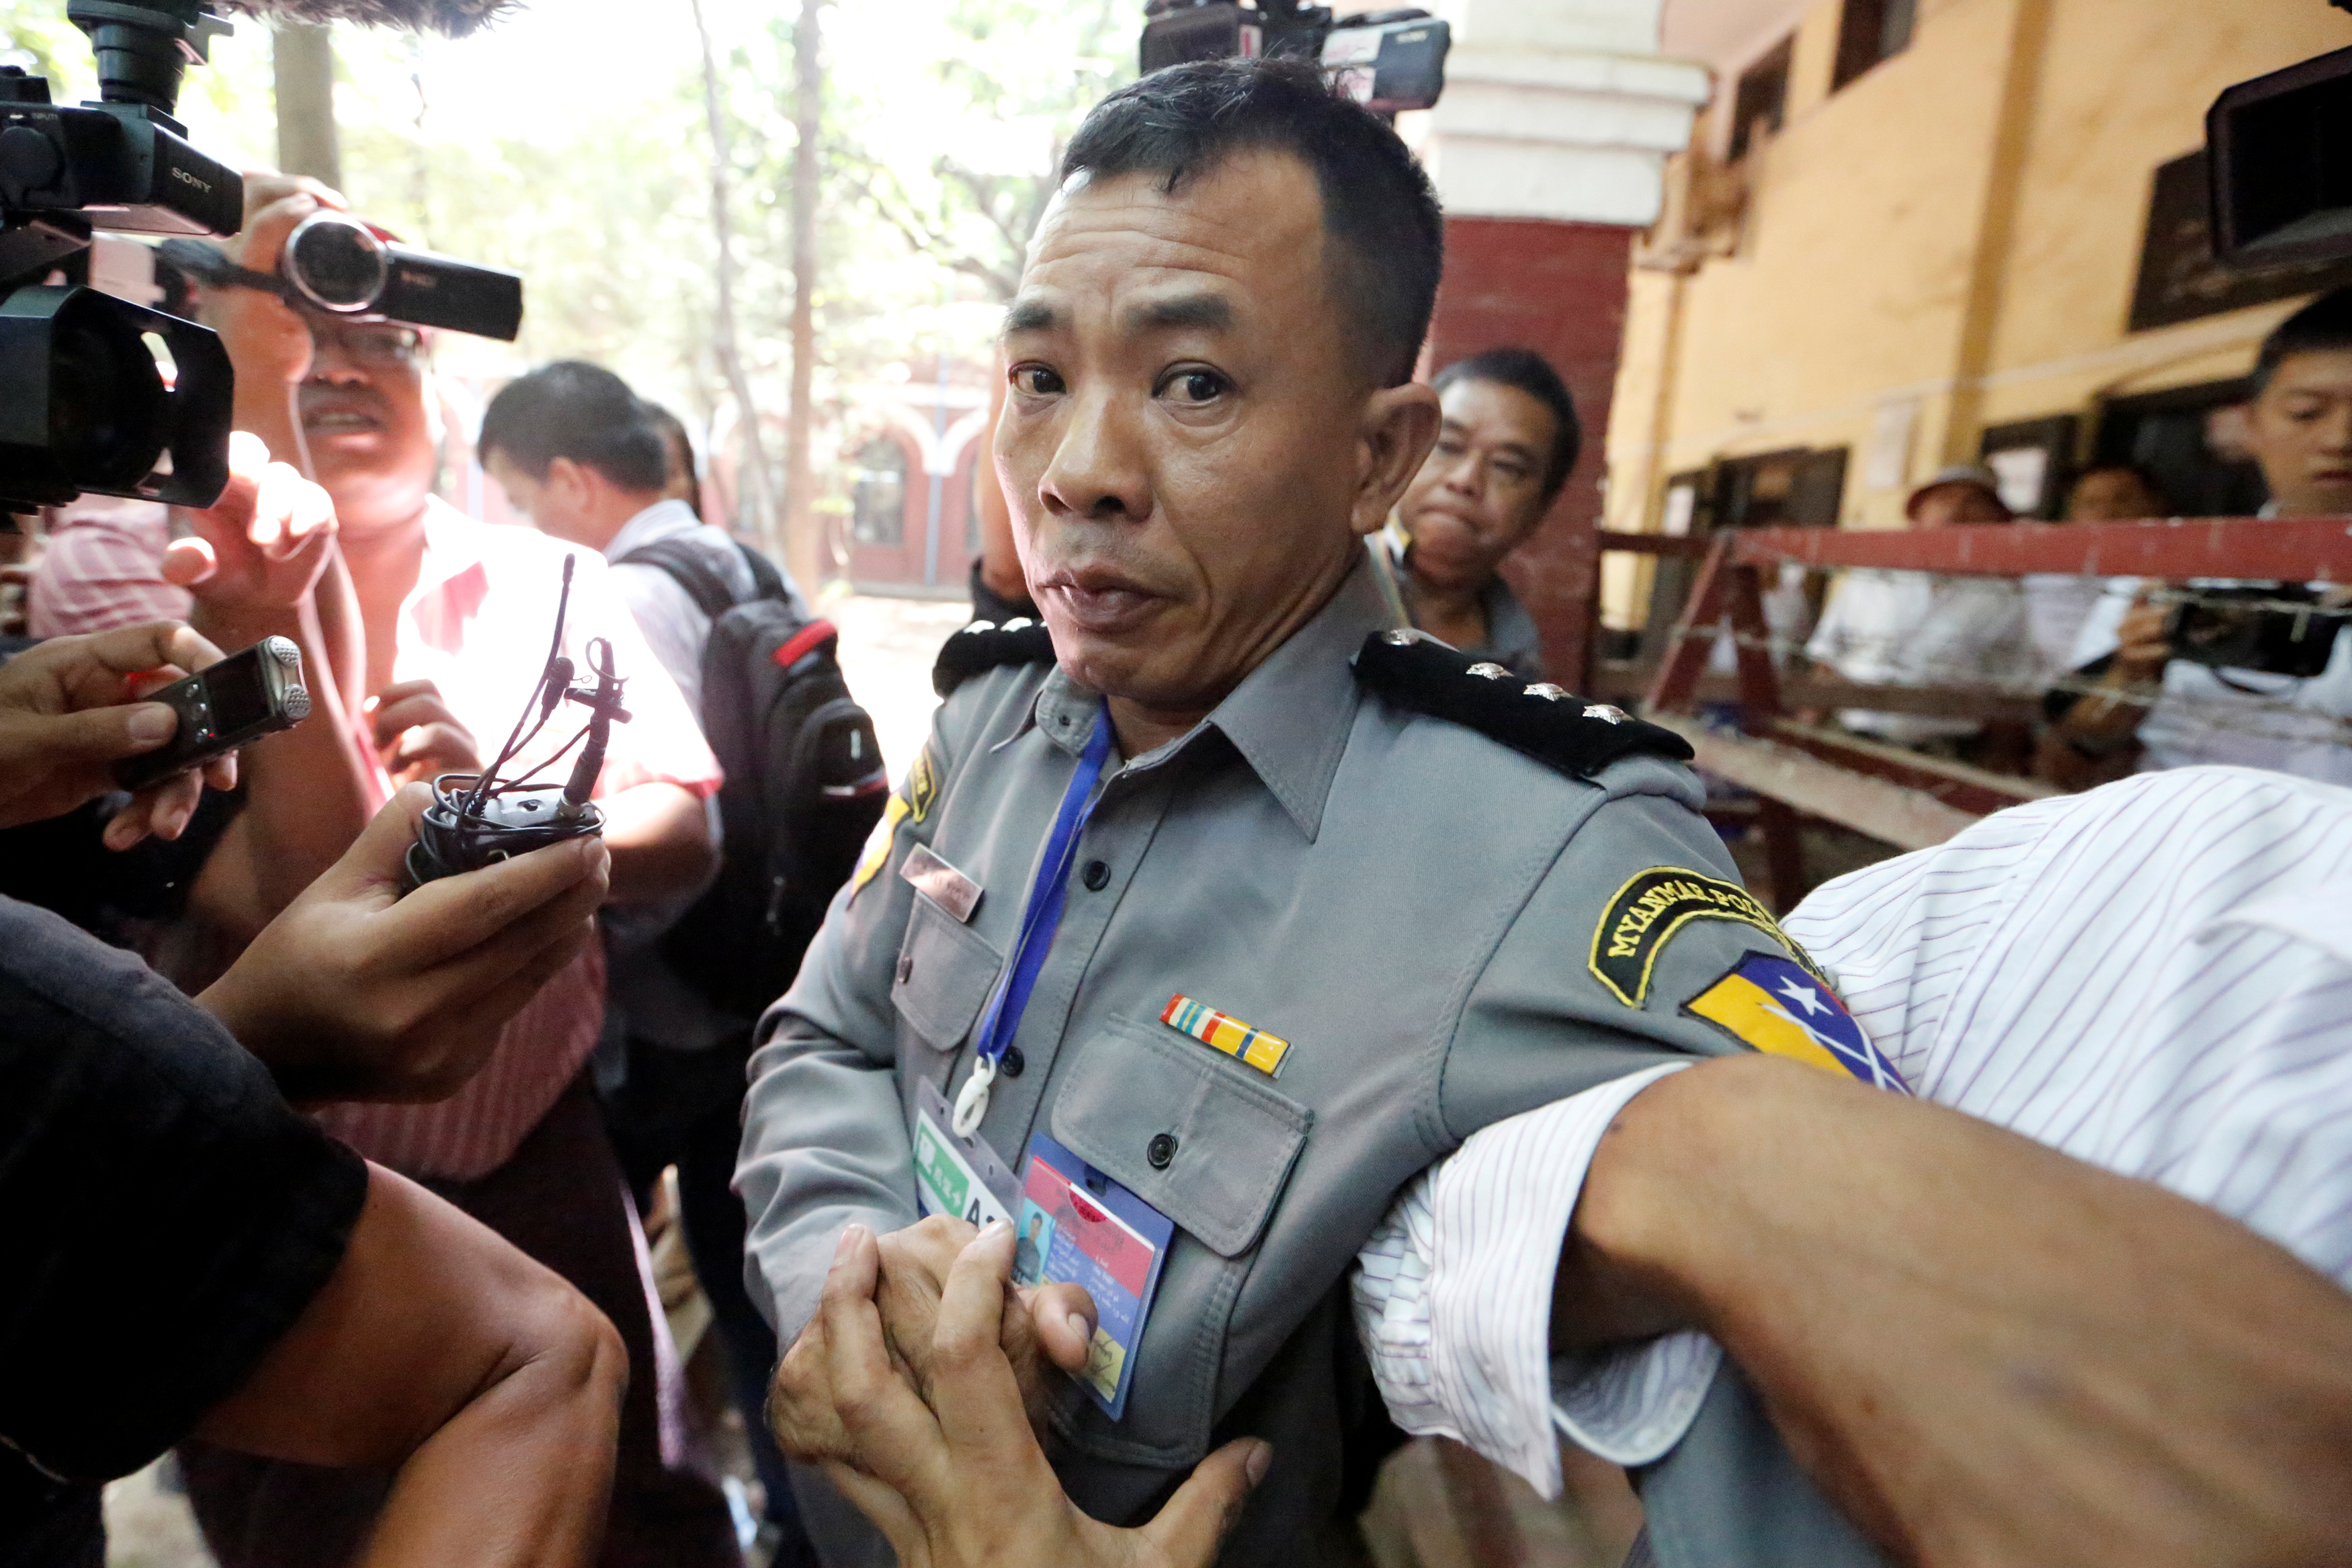 Police captain Moe Yan Naing outside the court room during a hearing of detained Reuters journalists Wa Lone and Kyaw Soe Oo in Yangon, Myanmar April 20, 2018 . (Ann Wang—Stringer/Reuters)